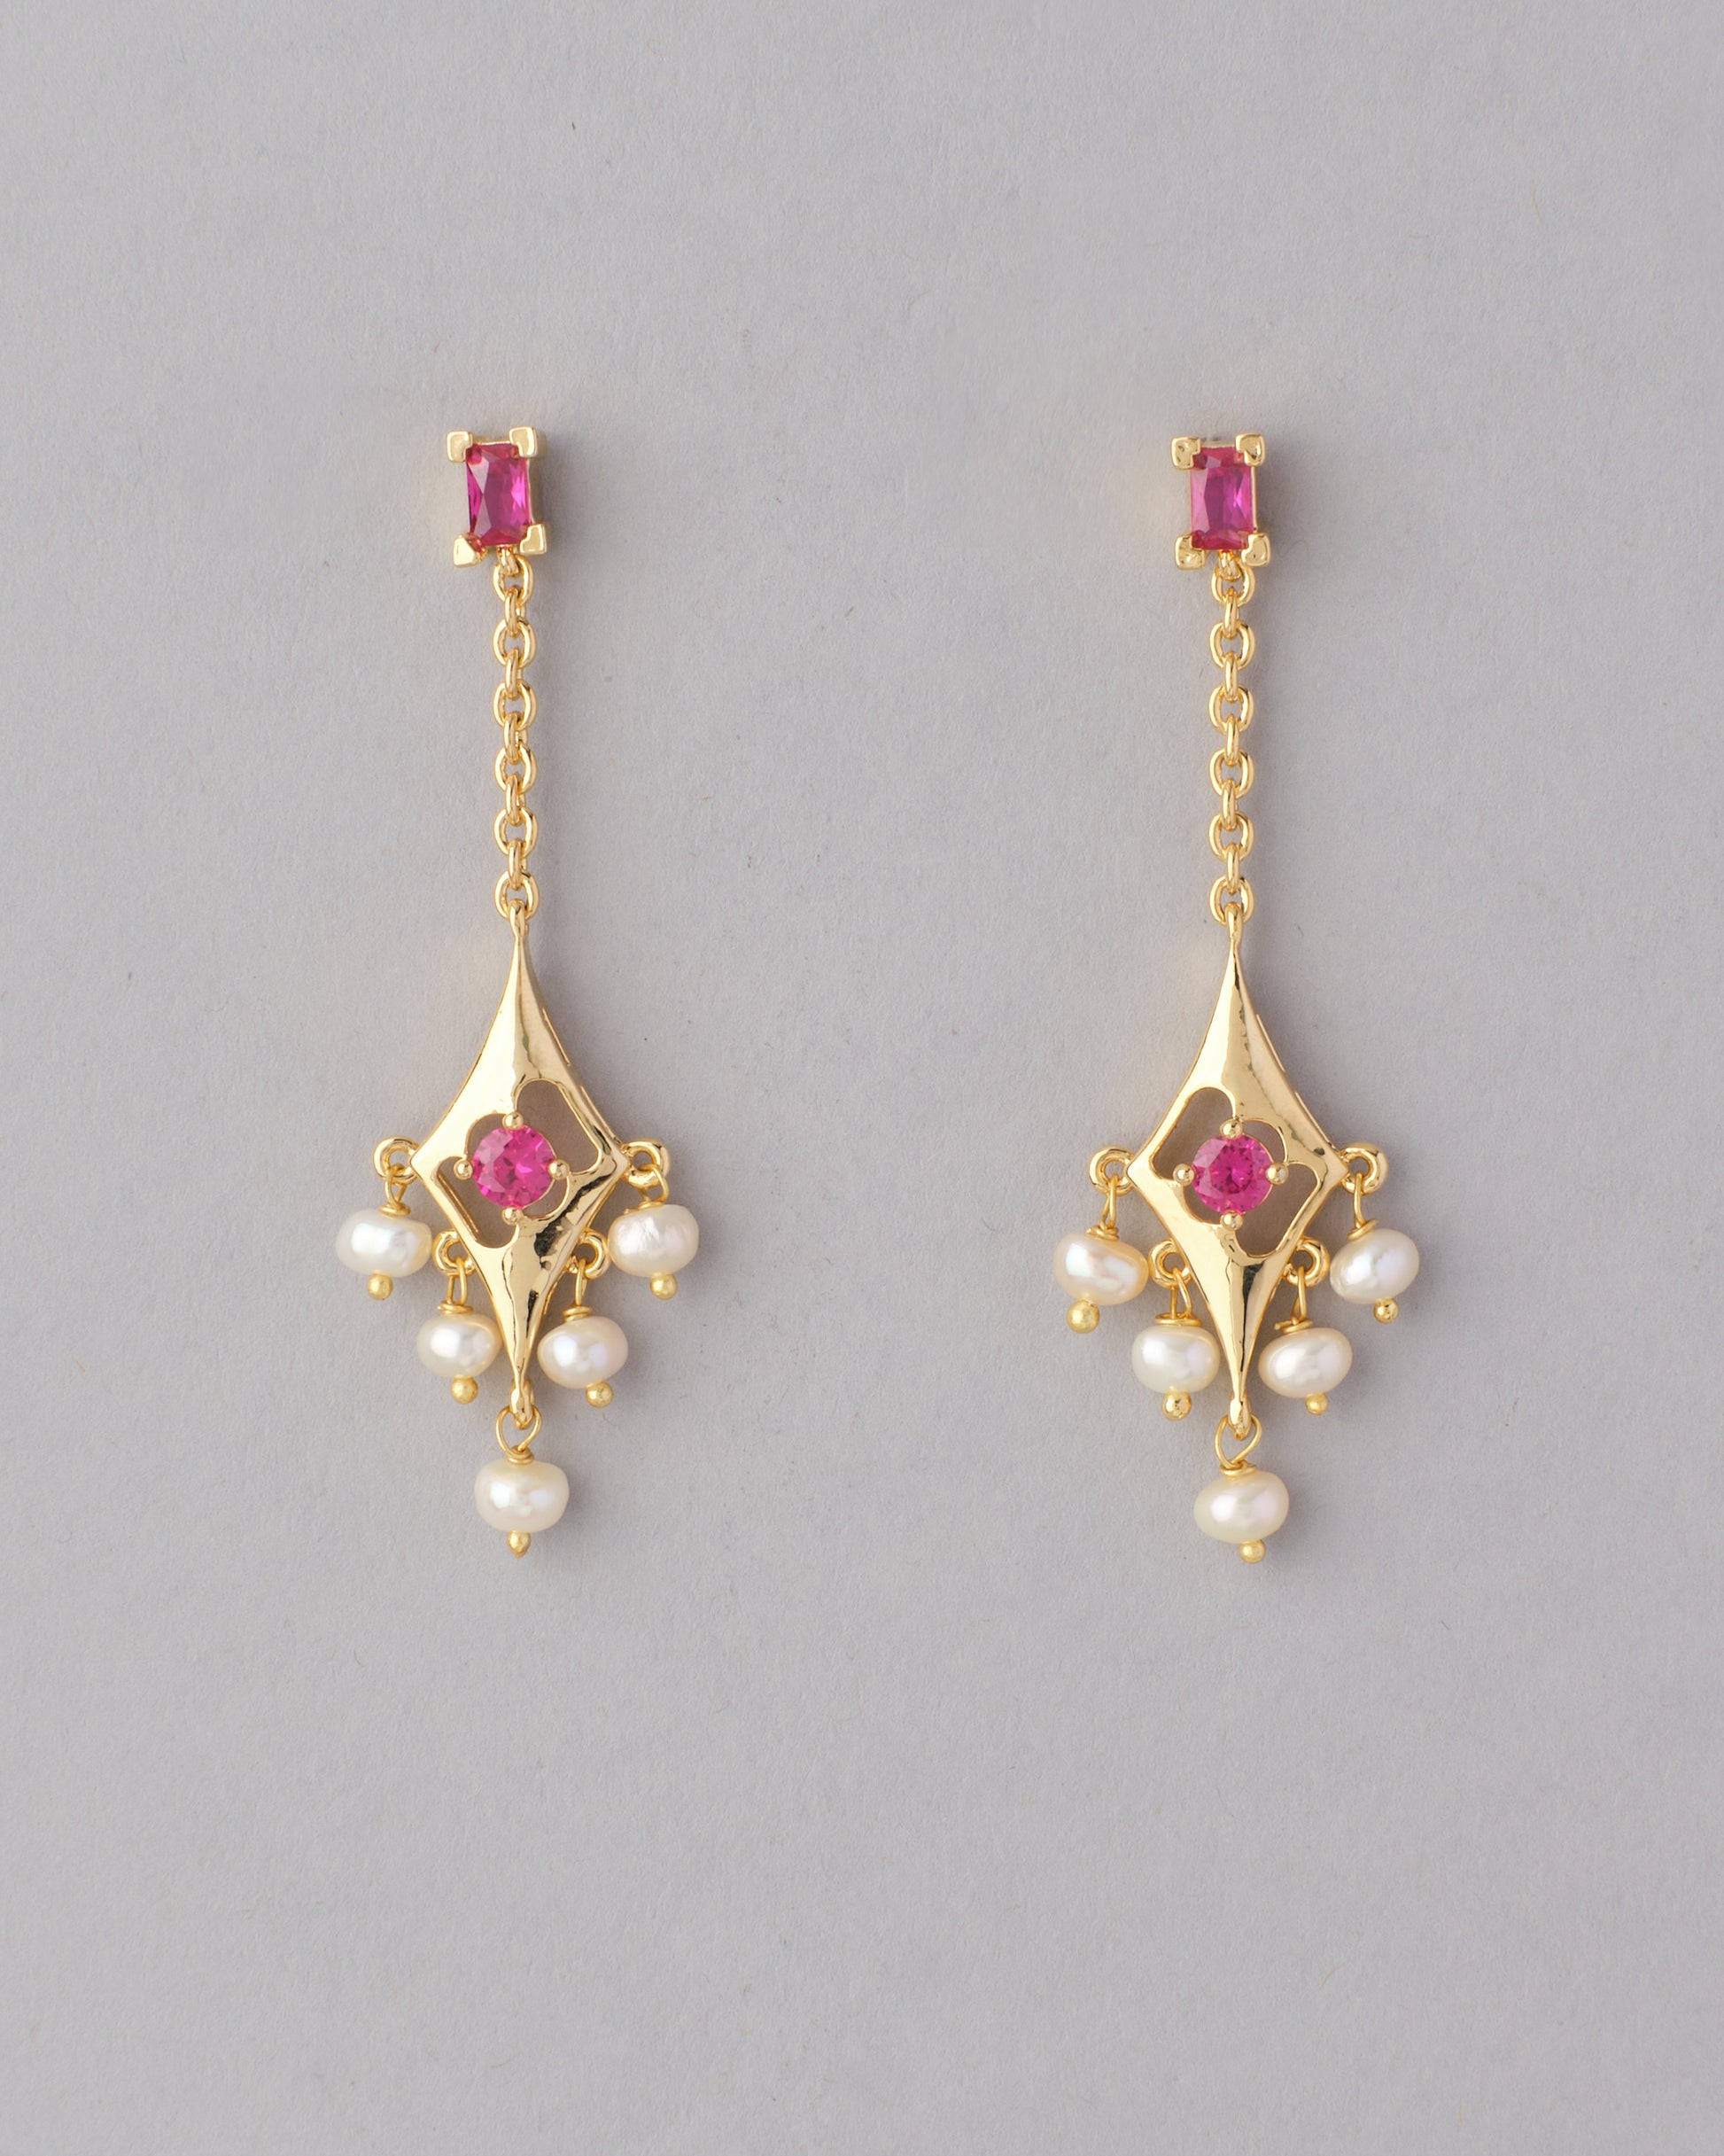 Ethnic Pearl Hanging Jhumkas with pink gemstones and pearl accents on a gray background by Chandrani Pearls India.